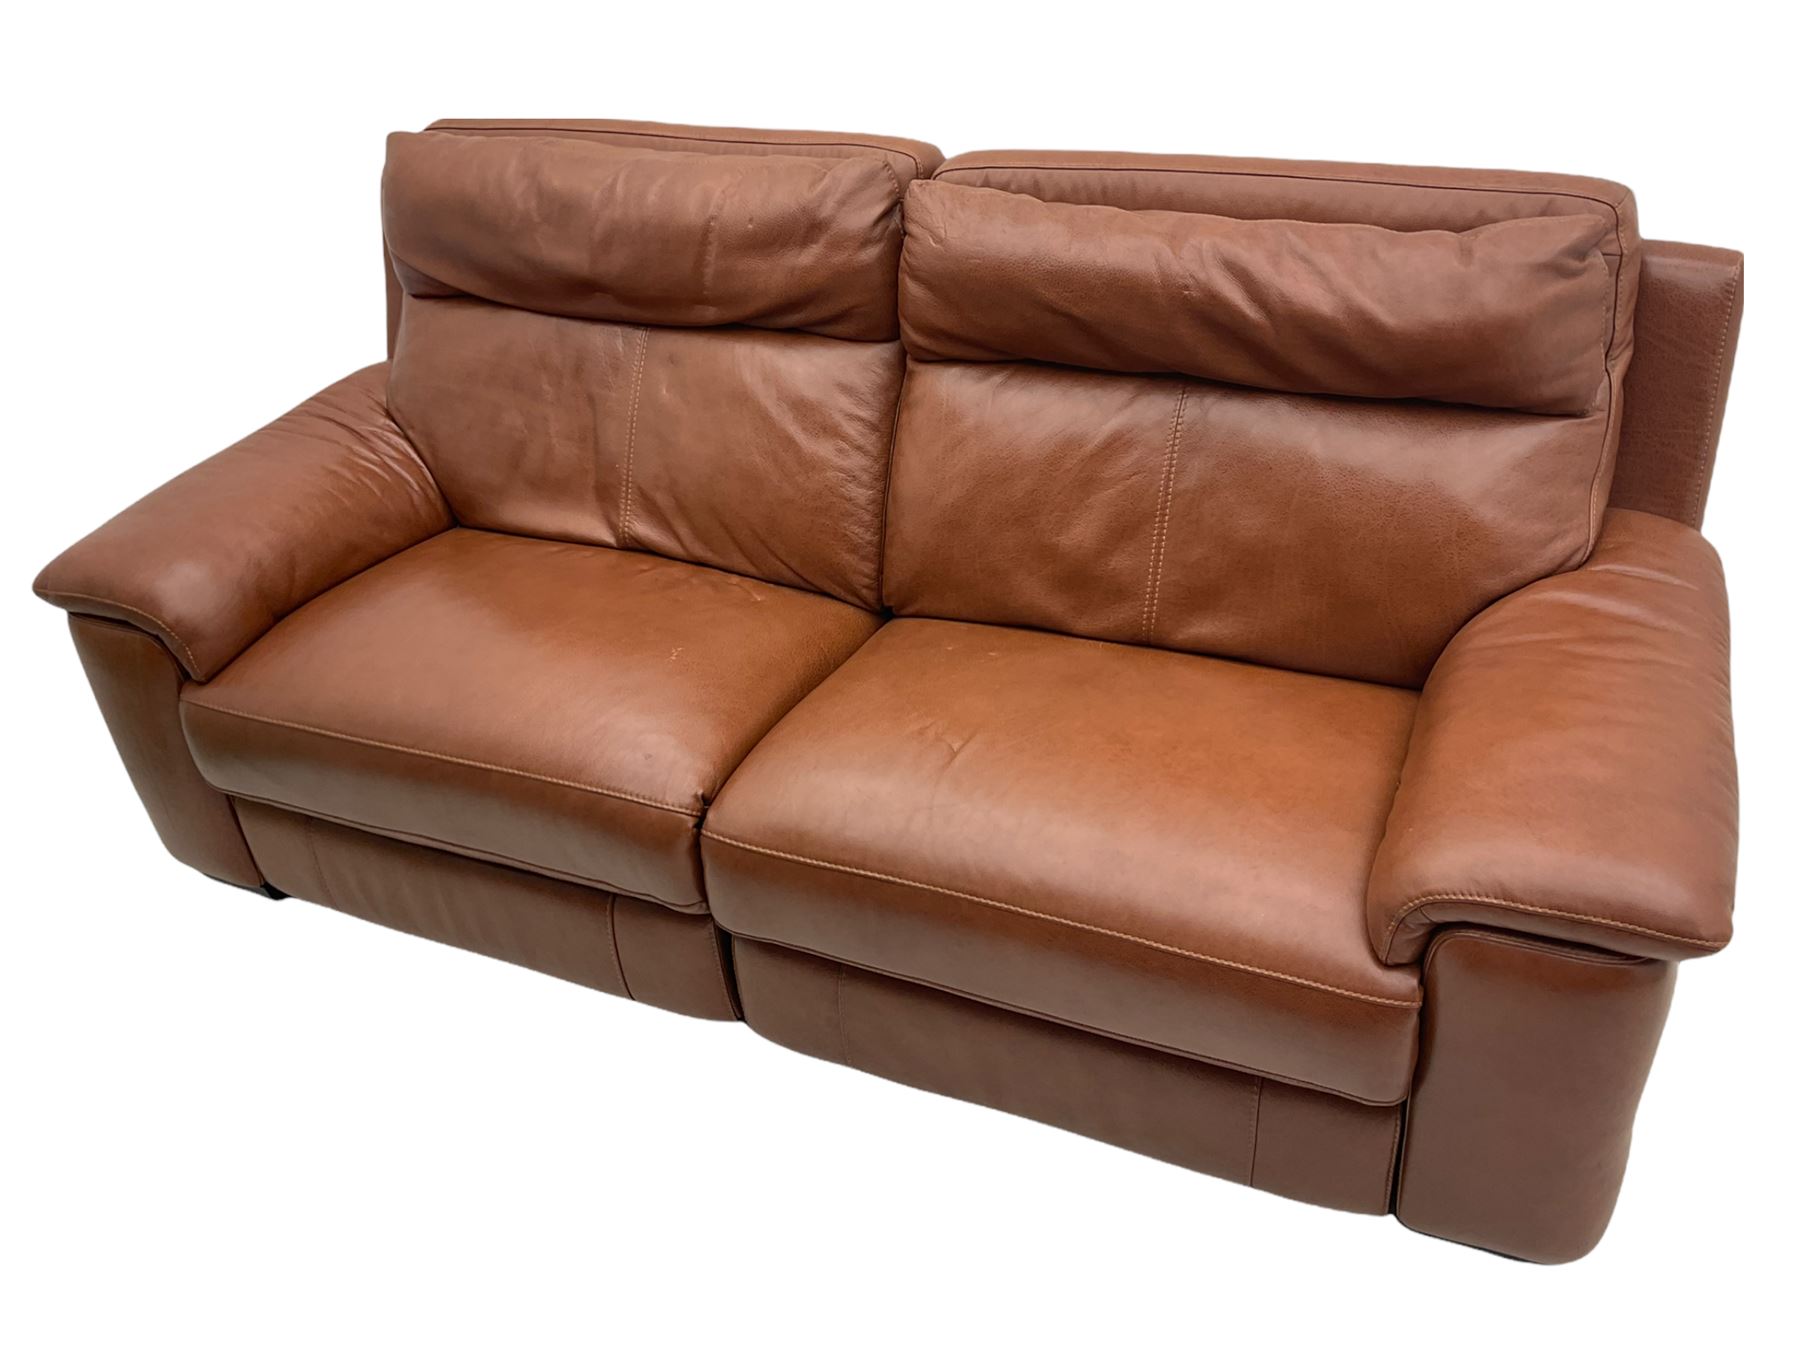 Three electric reclining sofa upholstered in tan leather - Image 10 of 23